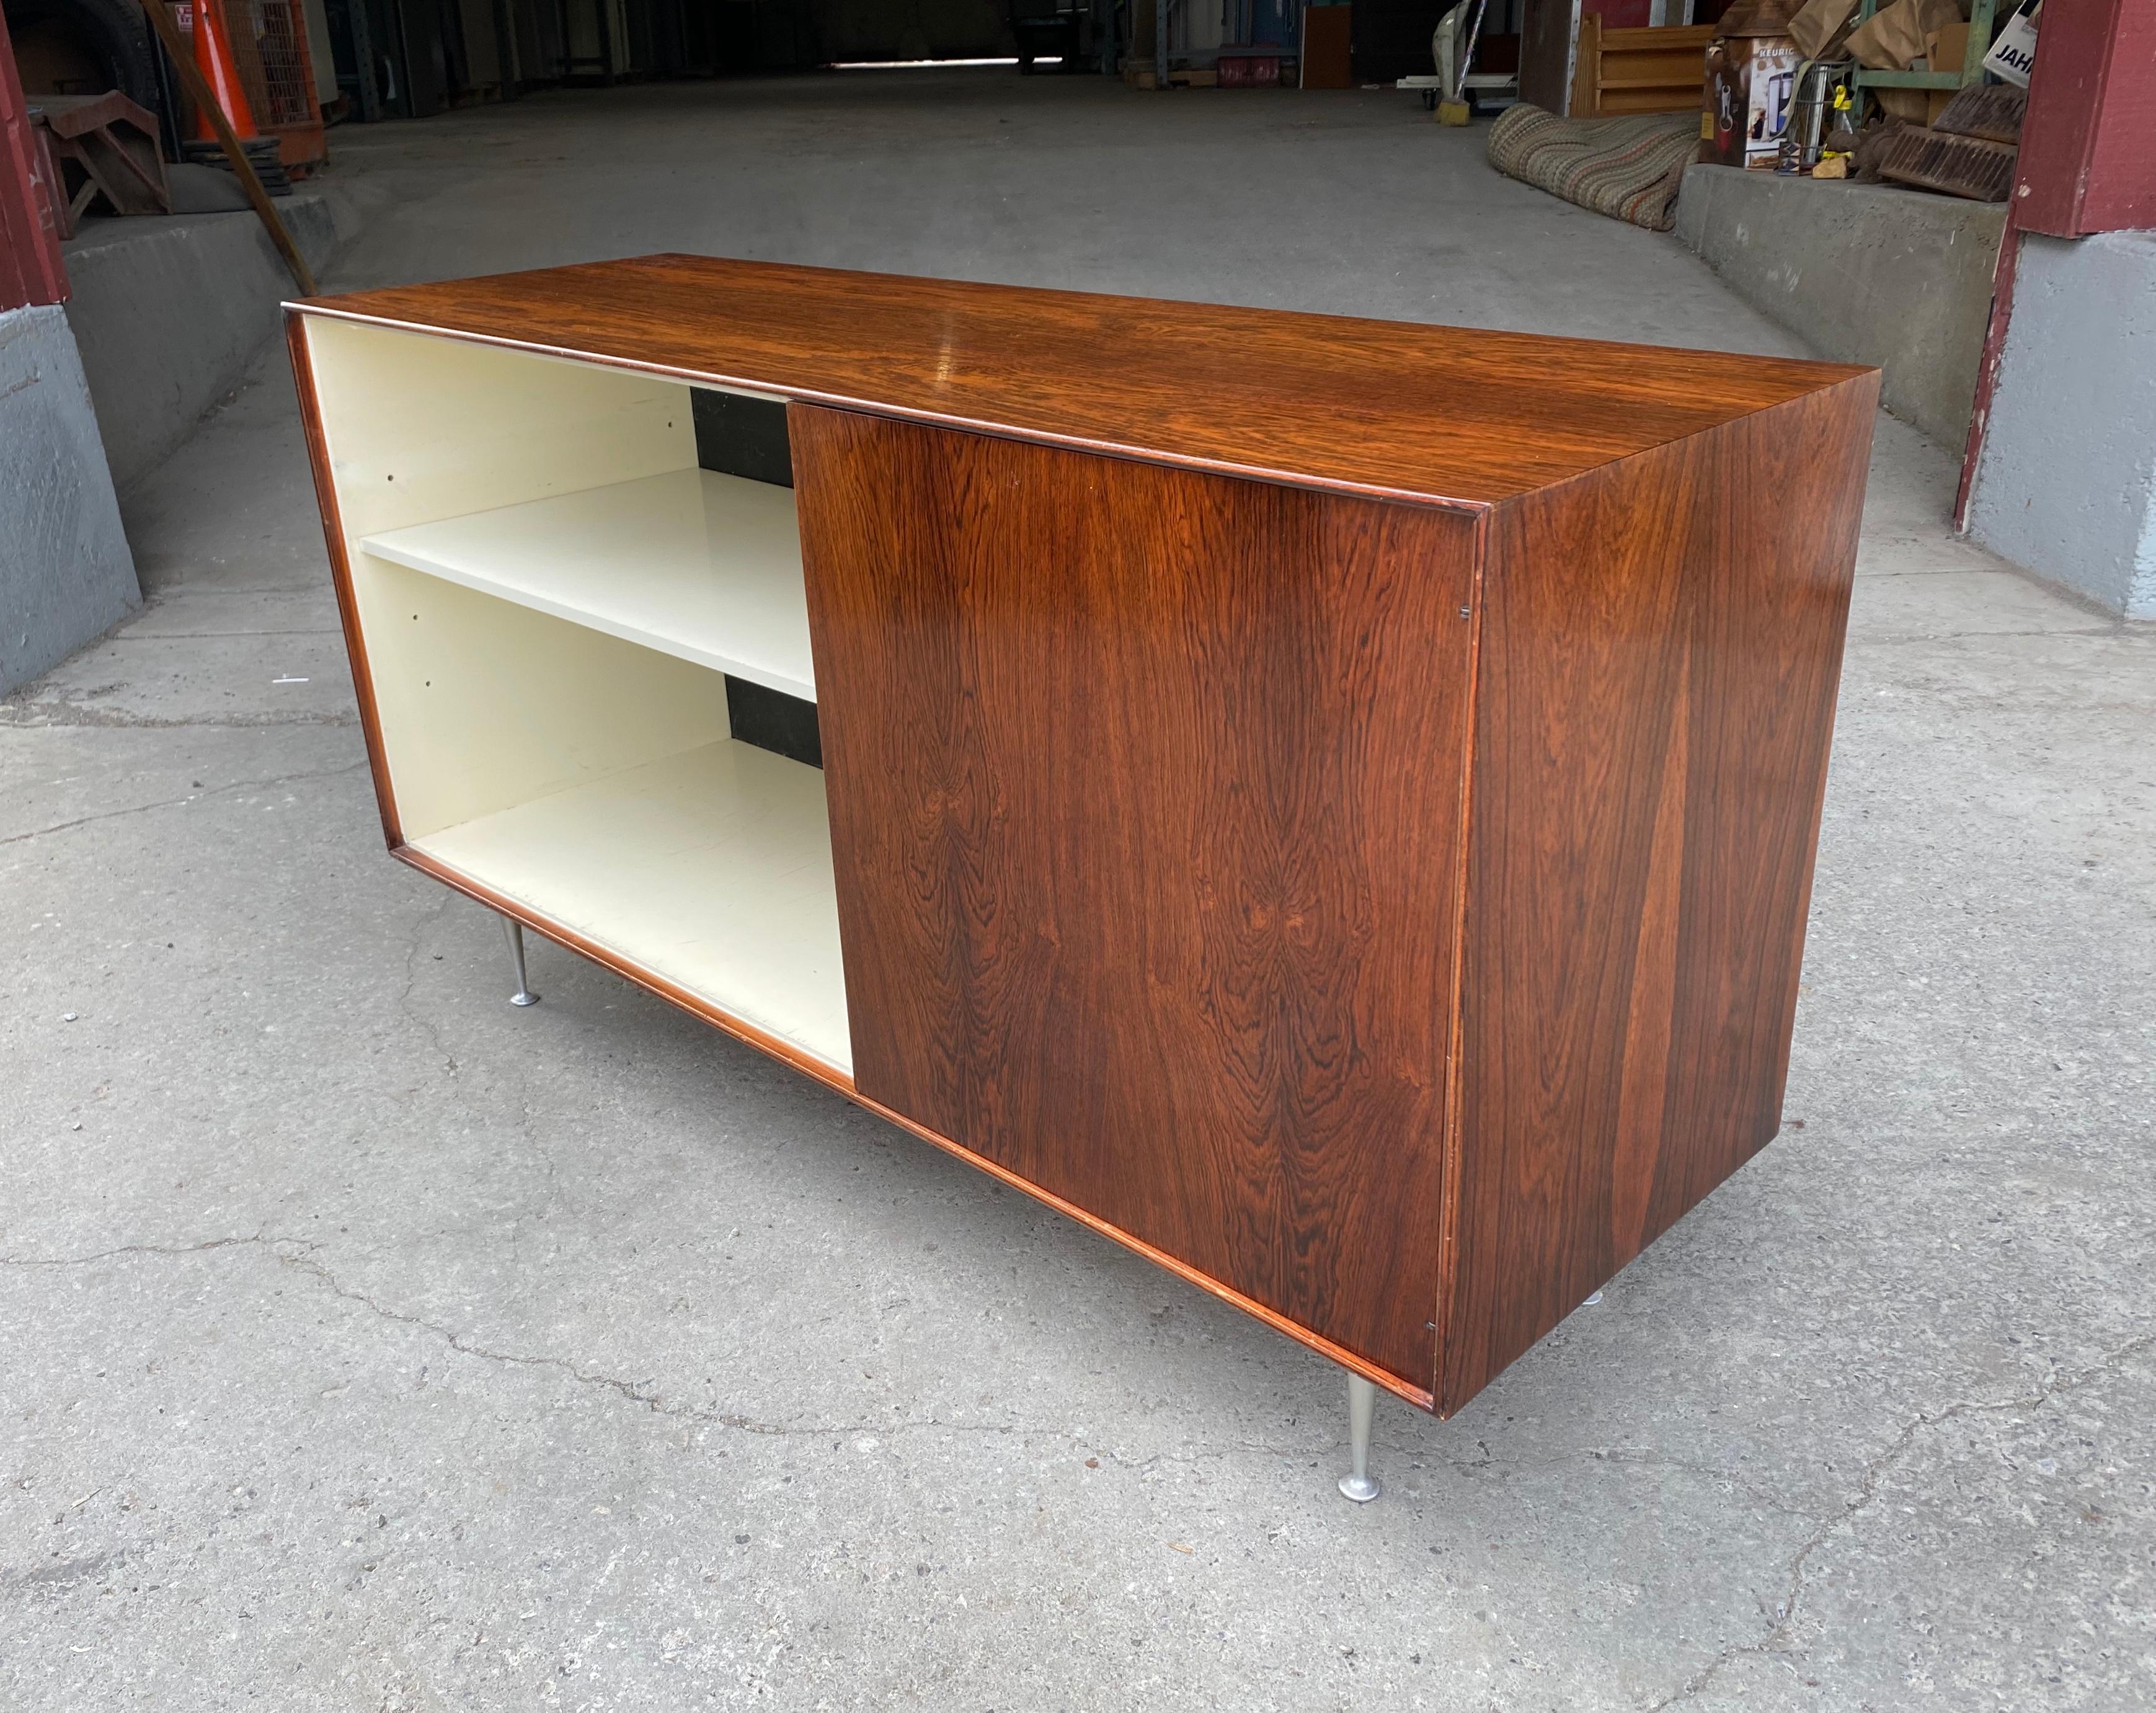 Classic George Nelson rosewood thin edge cabinet, manufactured by Herman Miller, sleek, simple, elegant rosewood cabinet. Left side, open storage / shelves, right side, door /shelves. Featuring Classic trademark George Nelson legs, beautiful